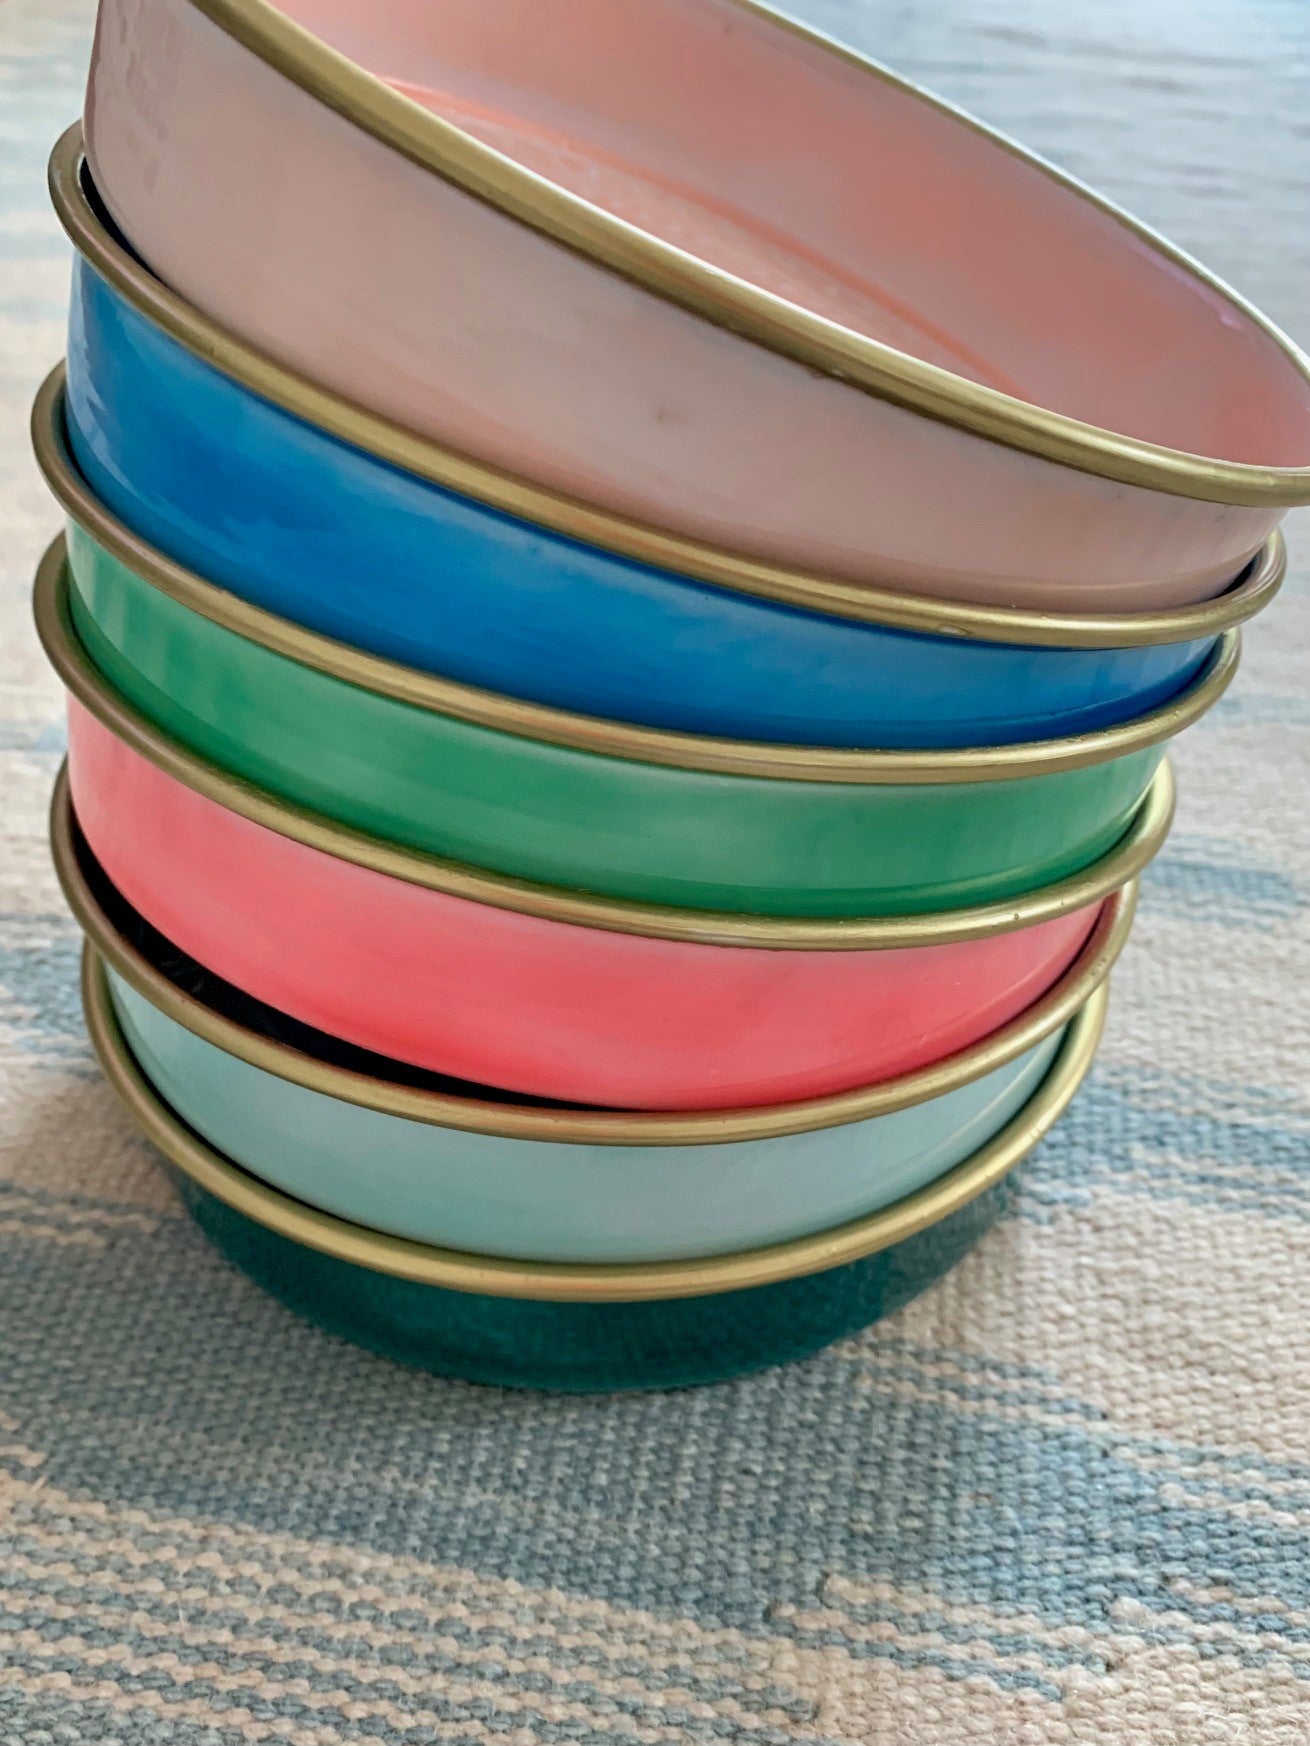 A collection of colourful enamel trays all stacked up together.